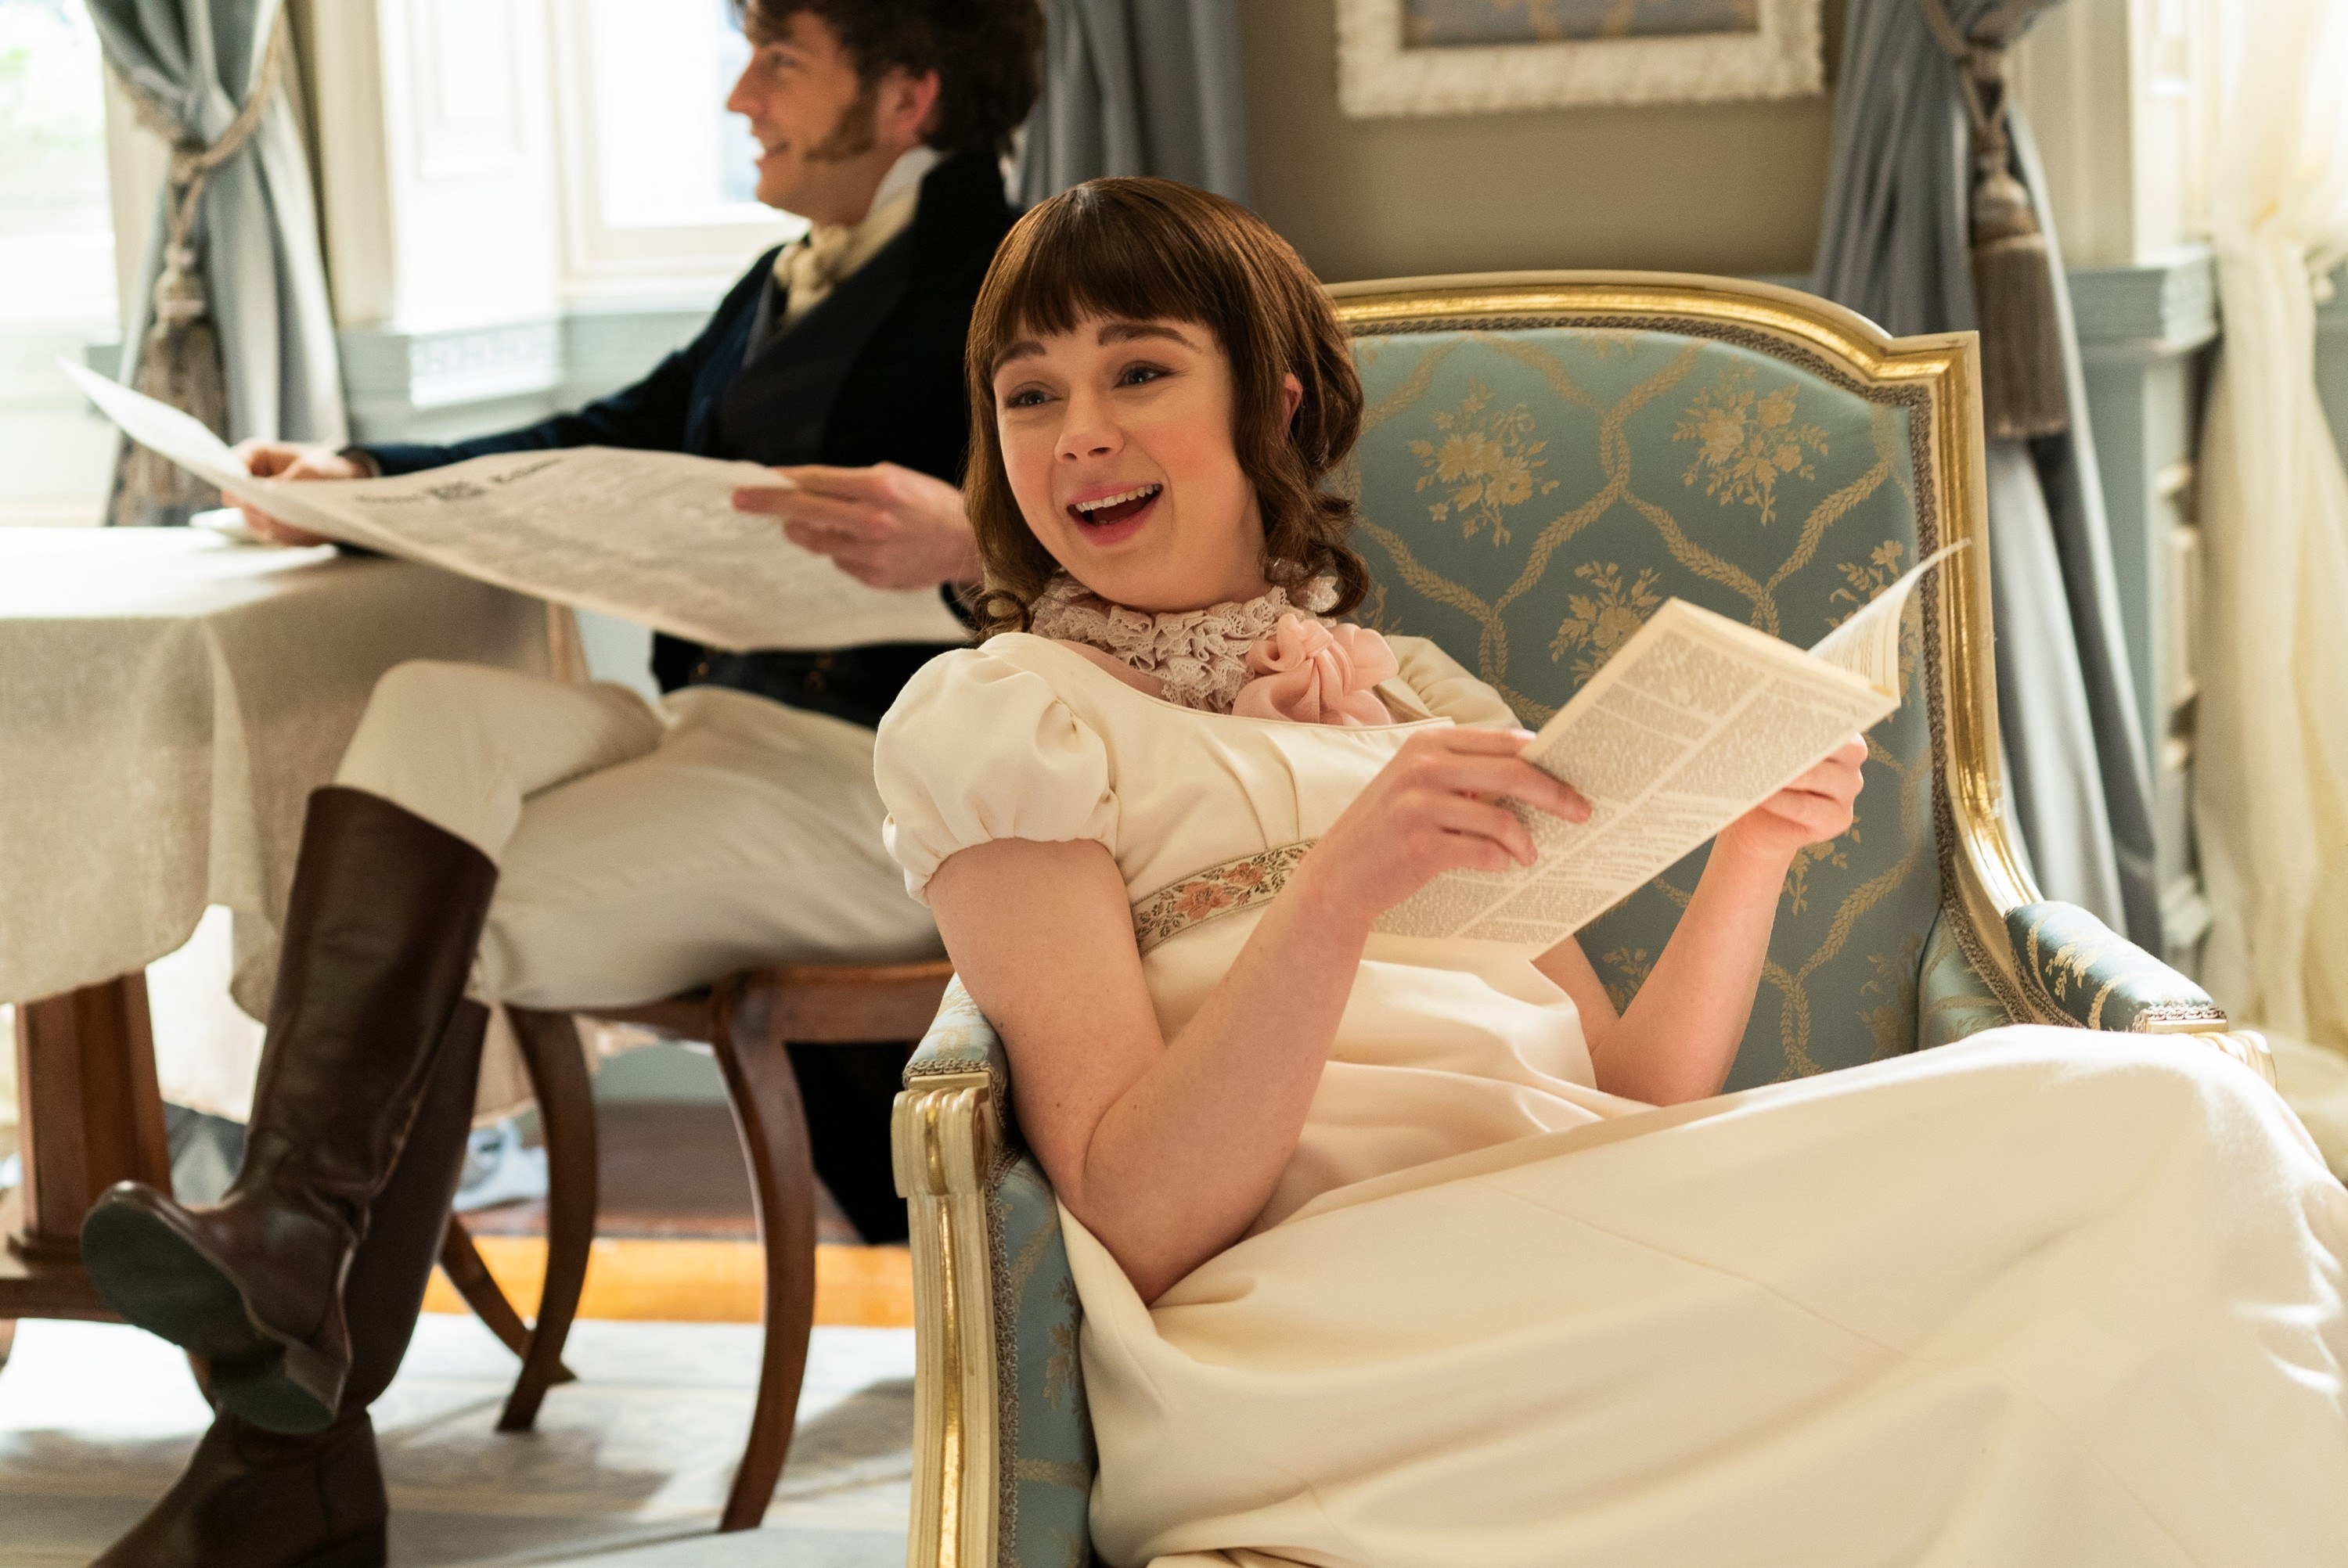 Teen girl with bangs reading a pamphlet in a chair and smiling